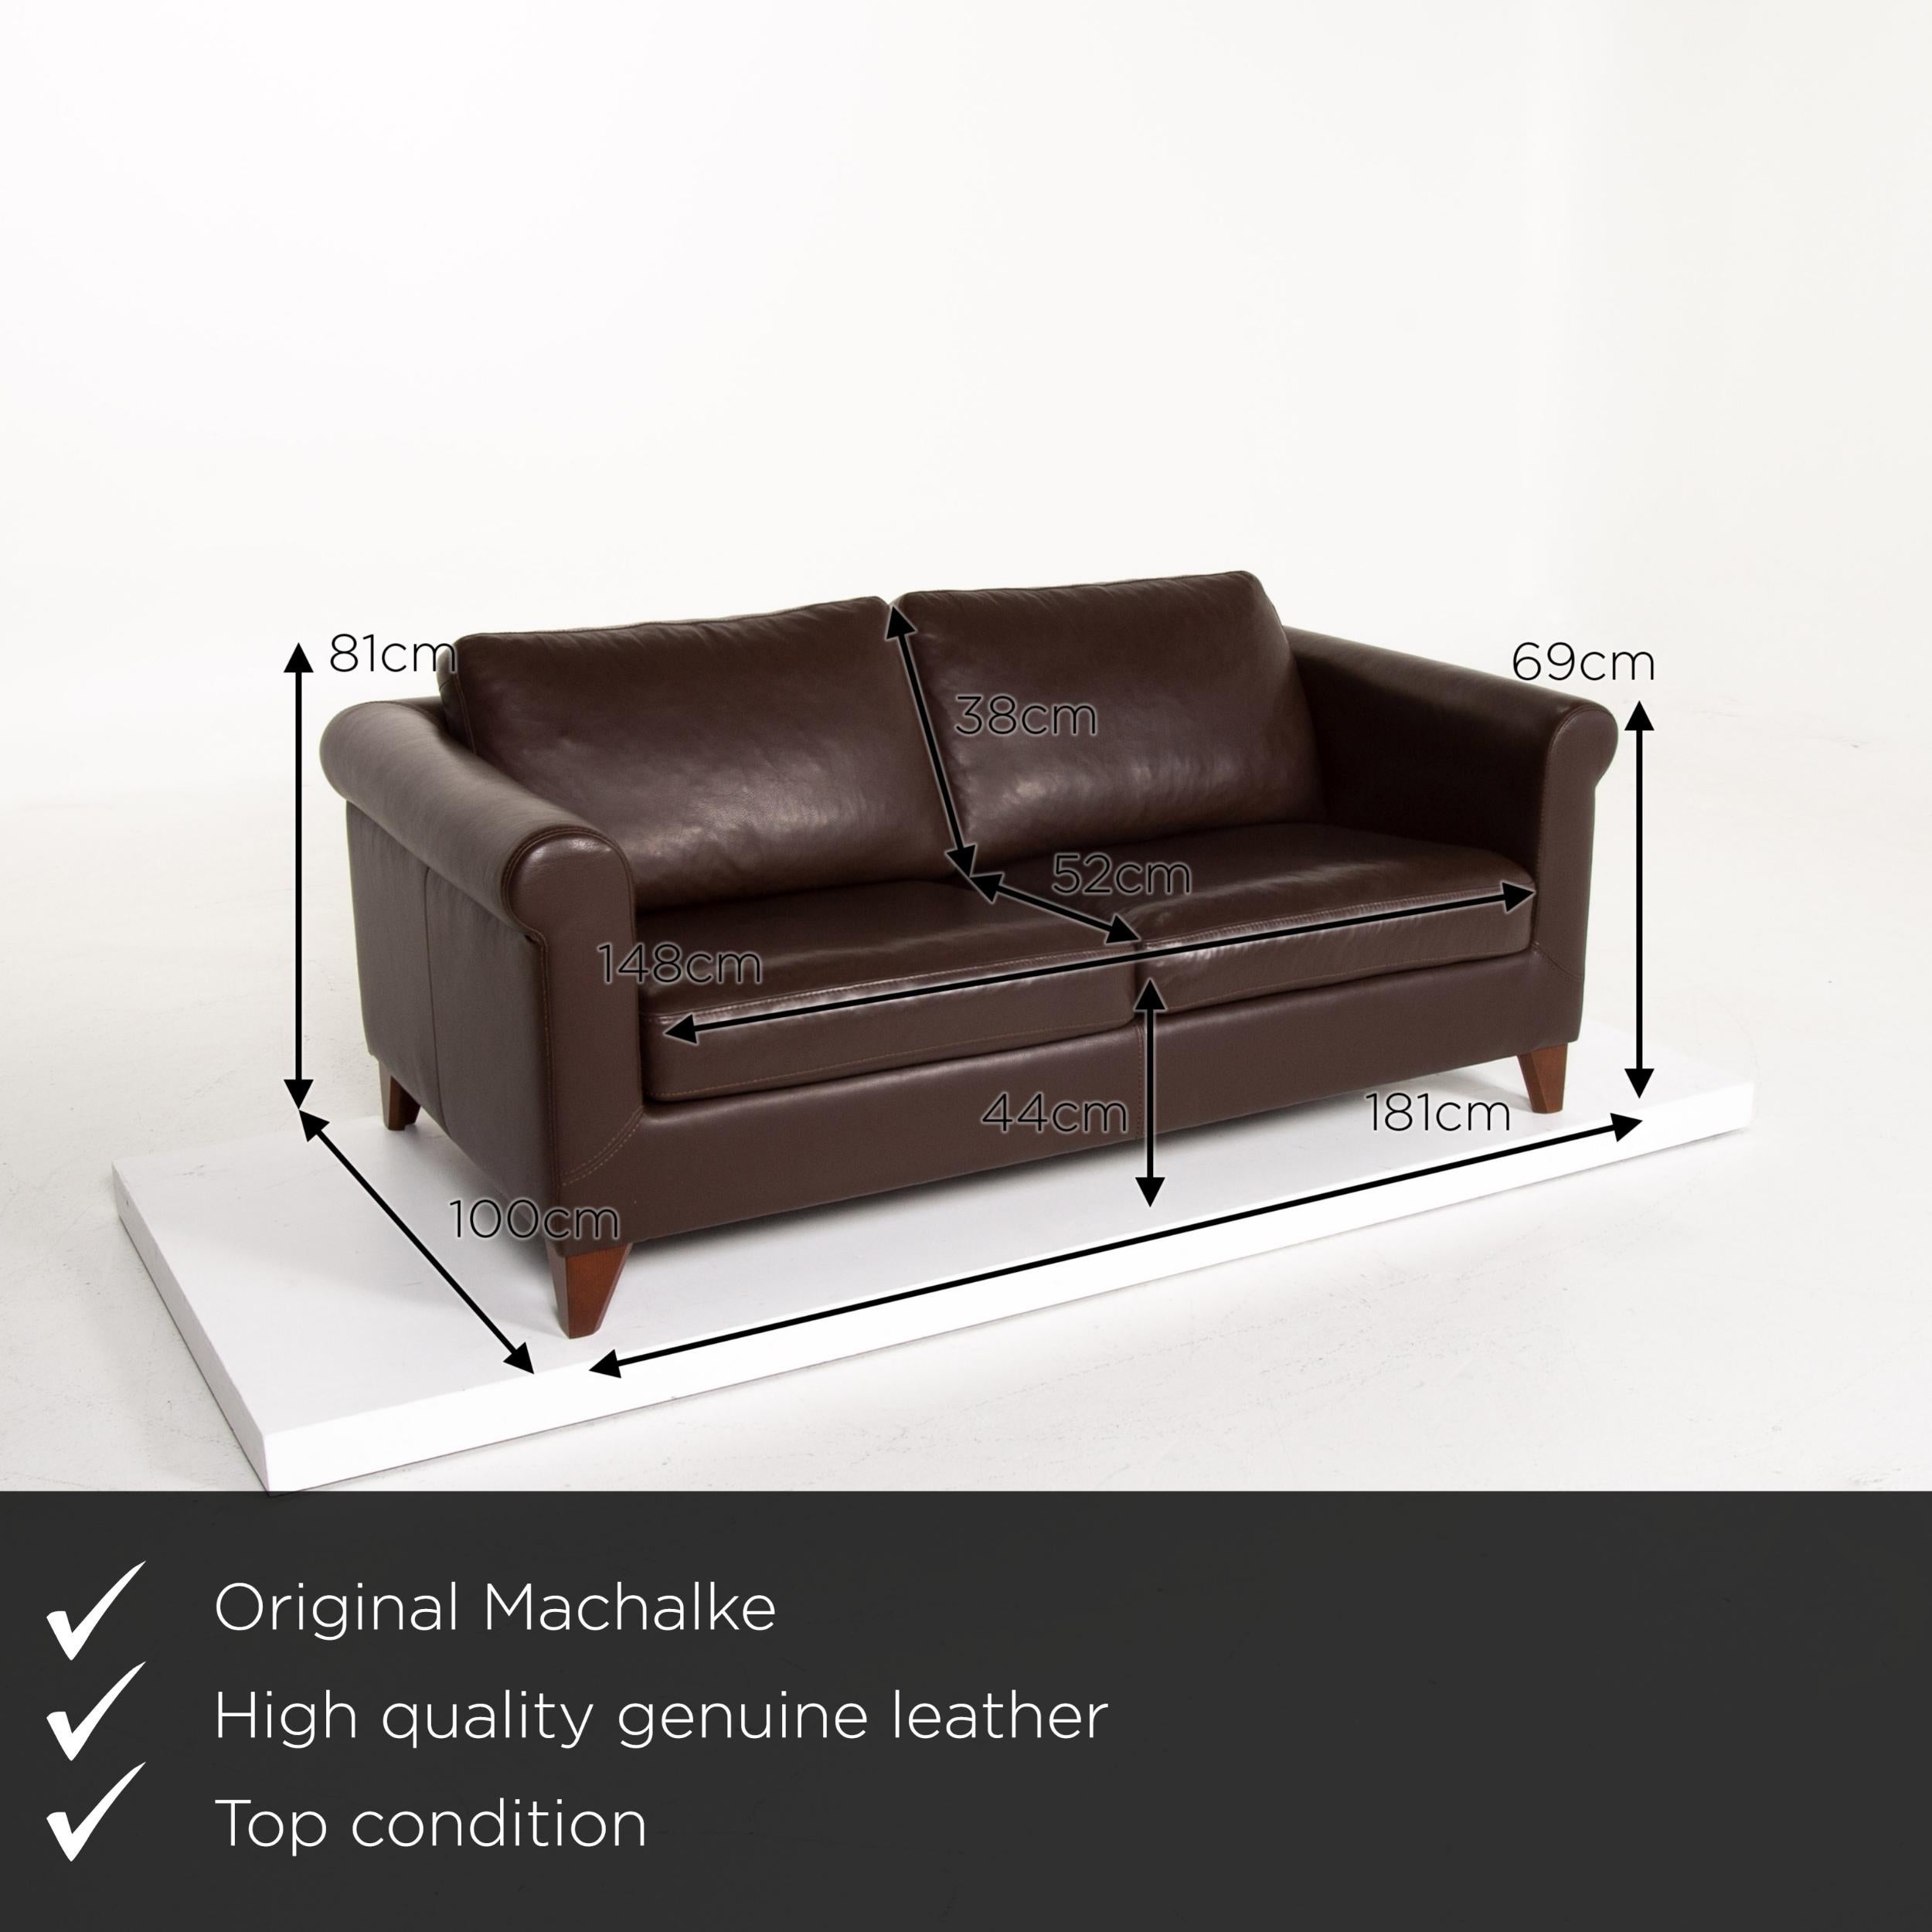 We present to you a Machalke Amadeo leather sofa dark brown brown tThree-seat couch.
    
 

 Product measurements in centimeters:
 

Depth 100
Width 181
Height 81
Seat height 44
Rest height 69
Seat depth 52
Seat width 148
Back height